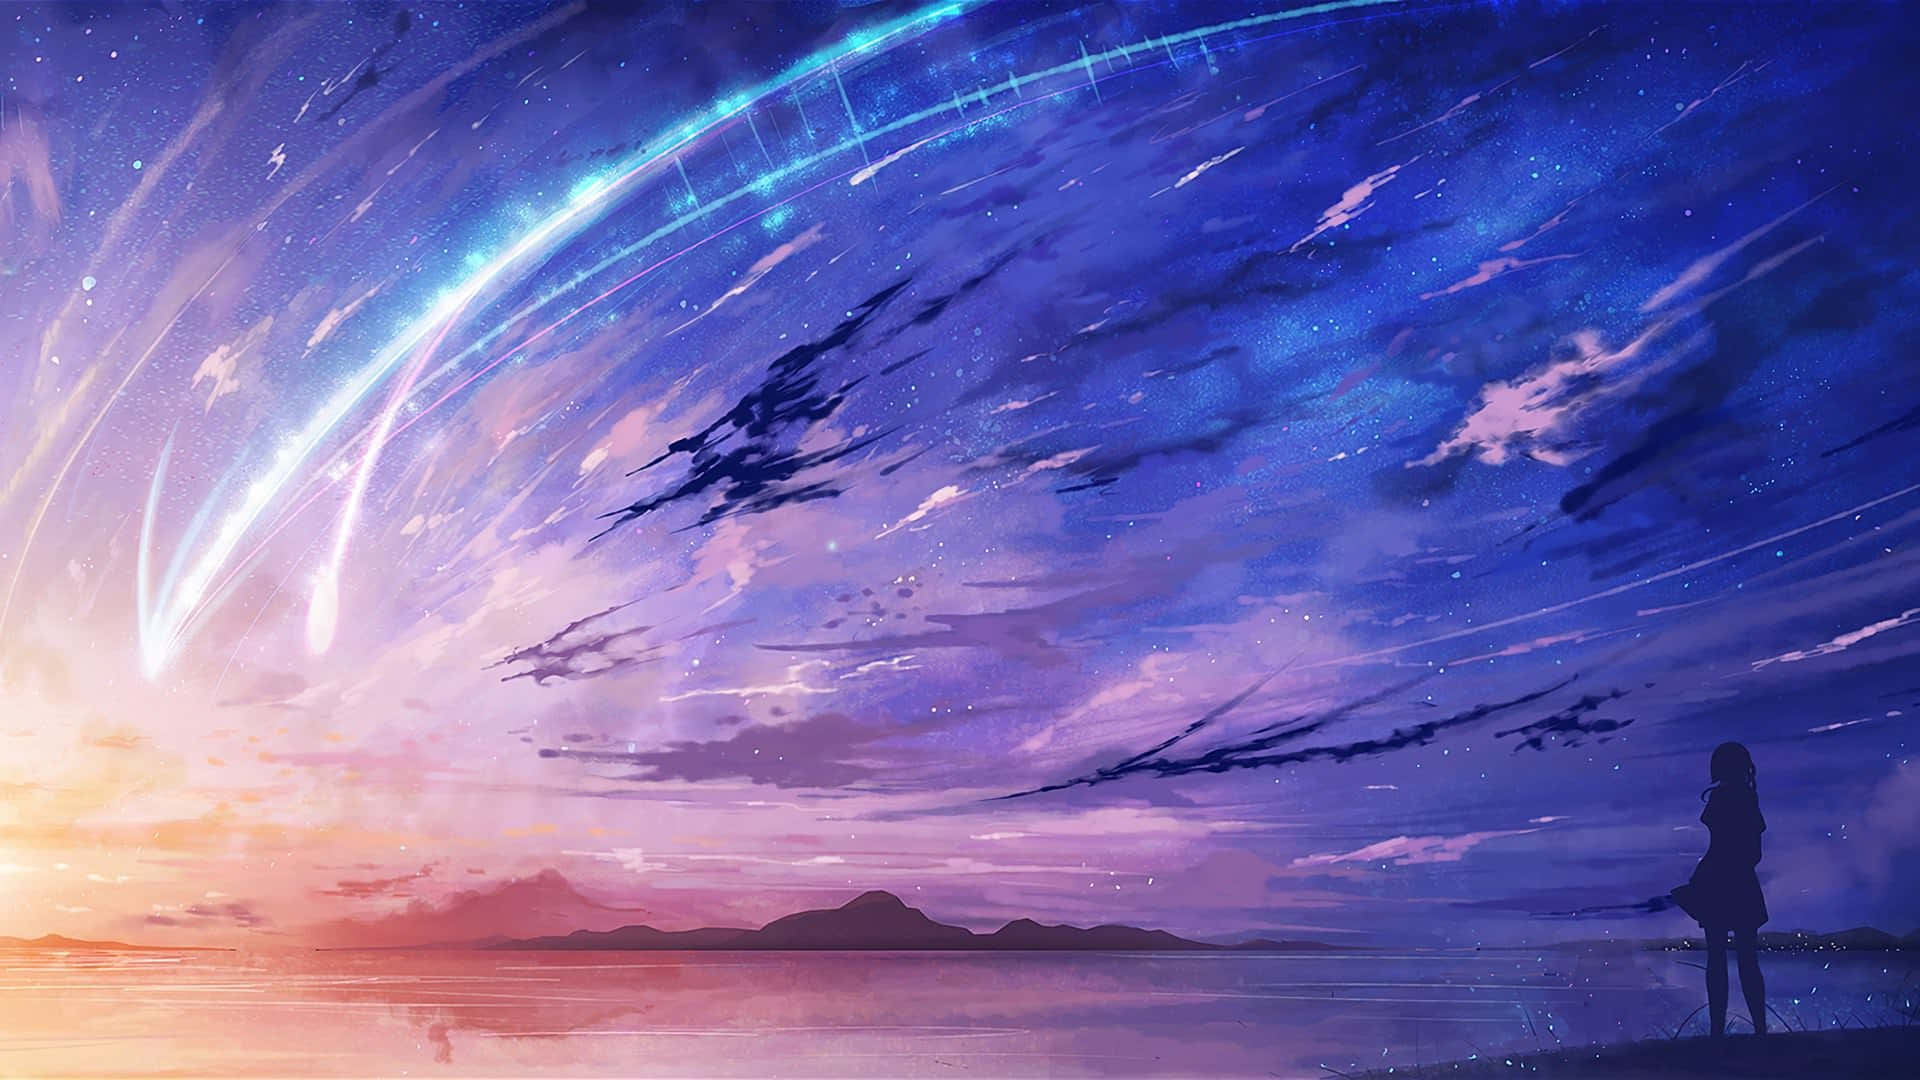 Download Experience the beauty of a stunning Anime-inspired sky